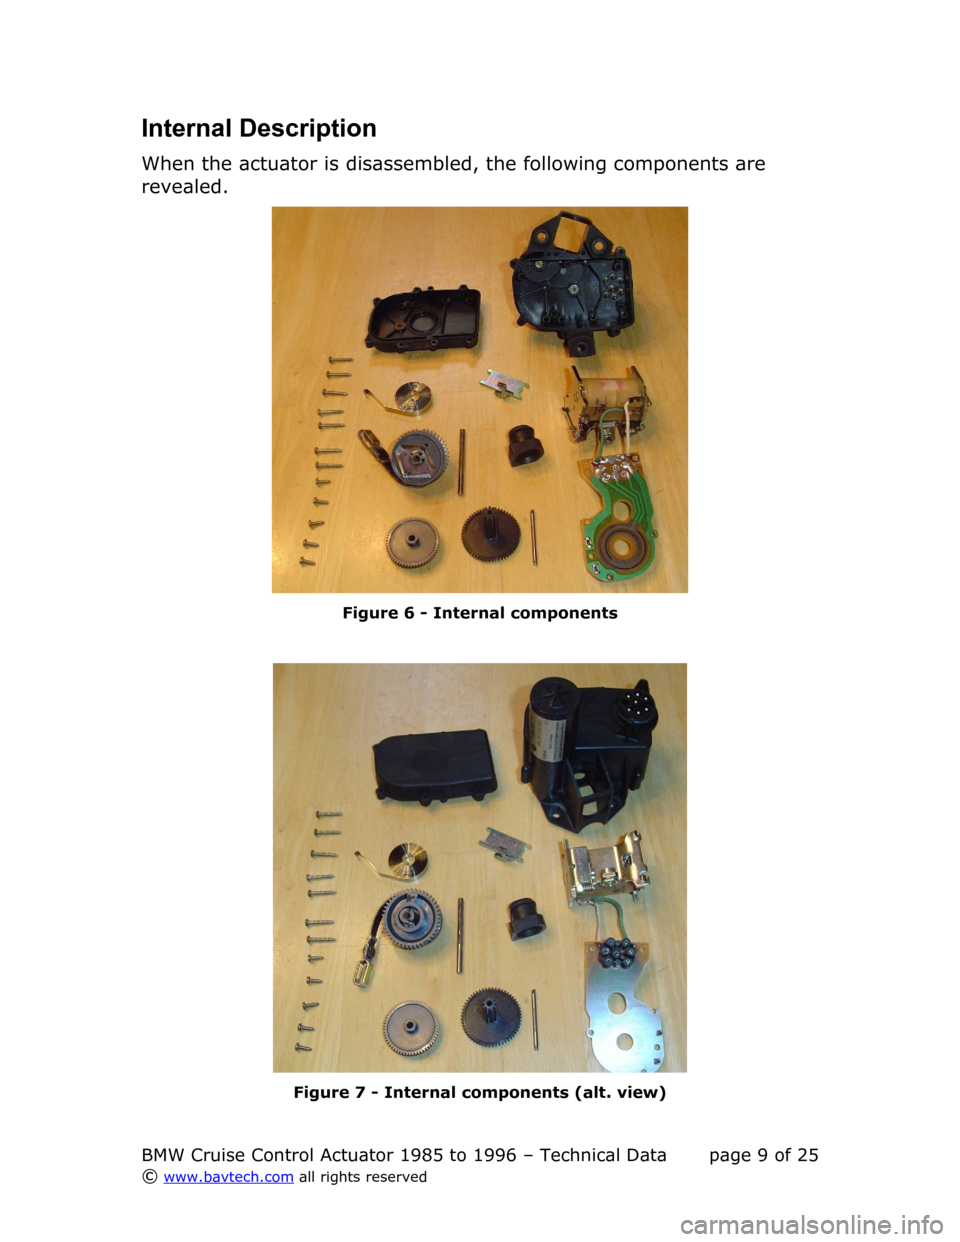 BMW 5 SERIES 1990 E34 Cruise Control Acutator Internal Description
When the actuator is disassembled, the following components are  
revealed.
Figure  6  - Internal components
Figure  7  - Internal components (alt. view)
BMW Cruise Control Actuat